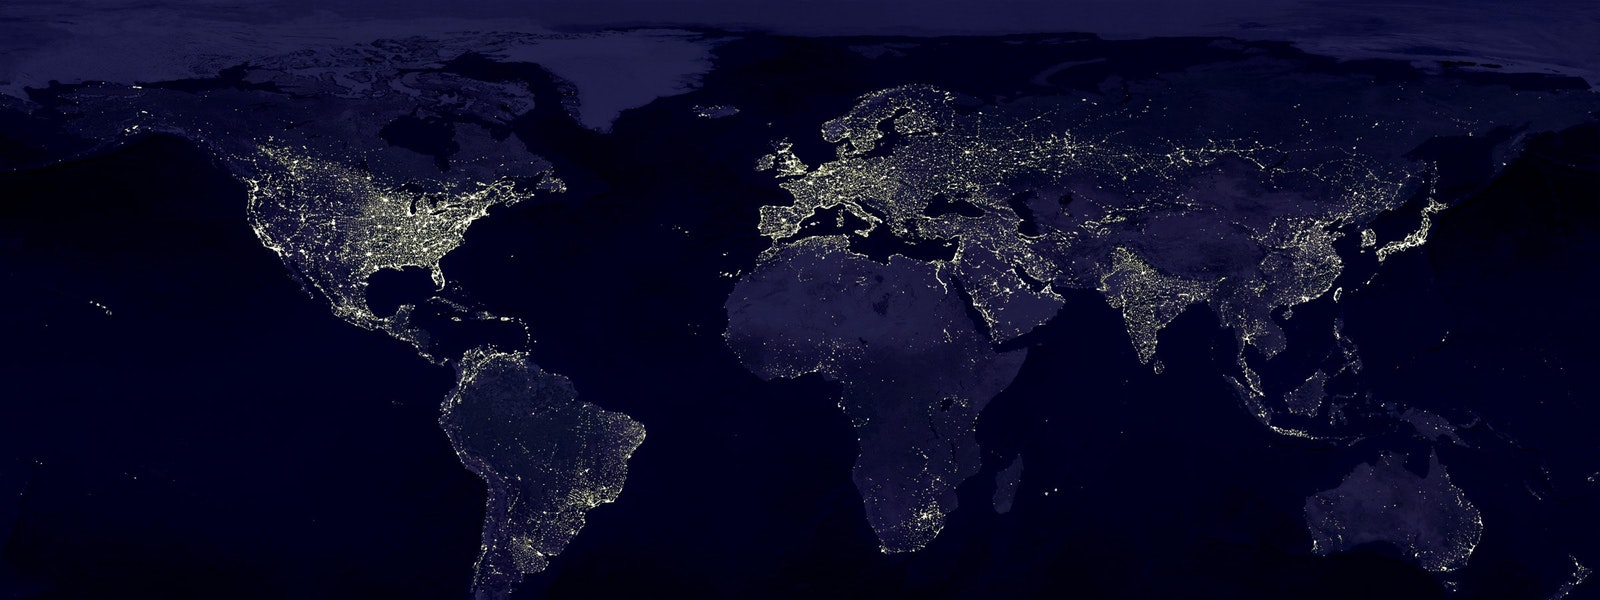 Satellite photo of globe at night with lights from cities